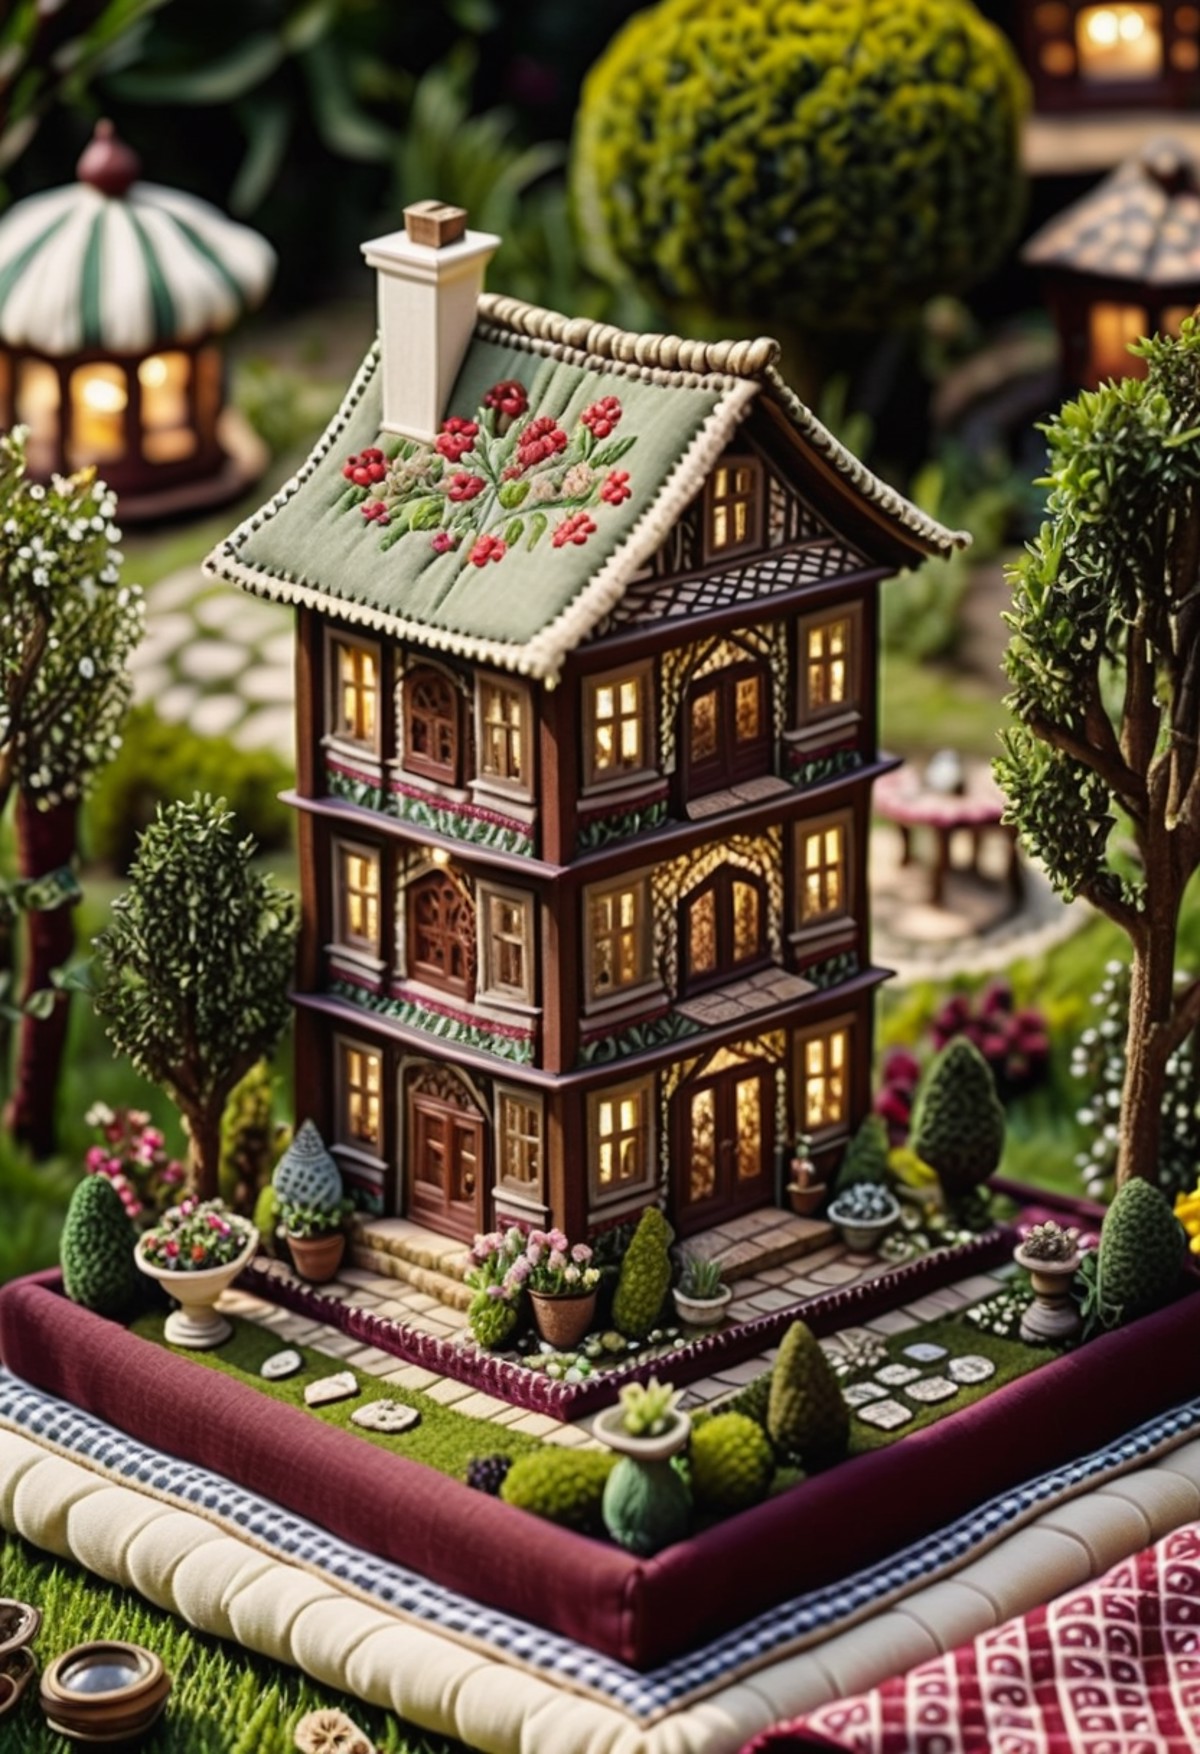 cinematic photo a miniature of a house, made entirely out of fabric and intricately stitched together, sits in the center ...